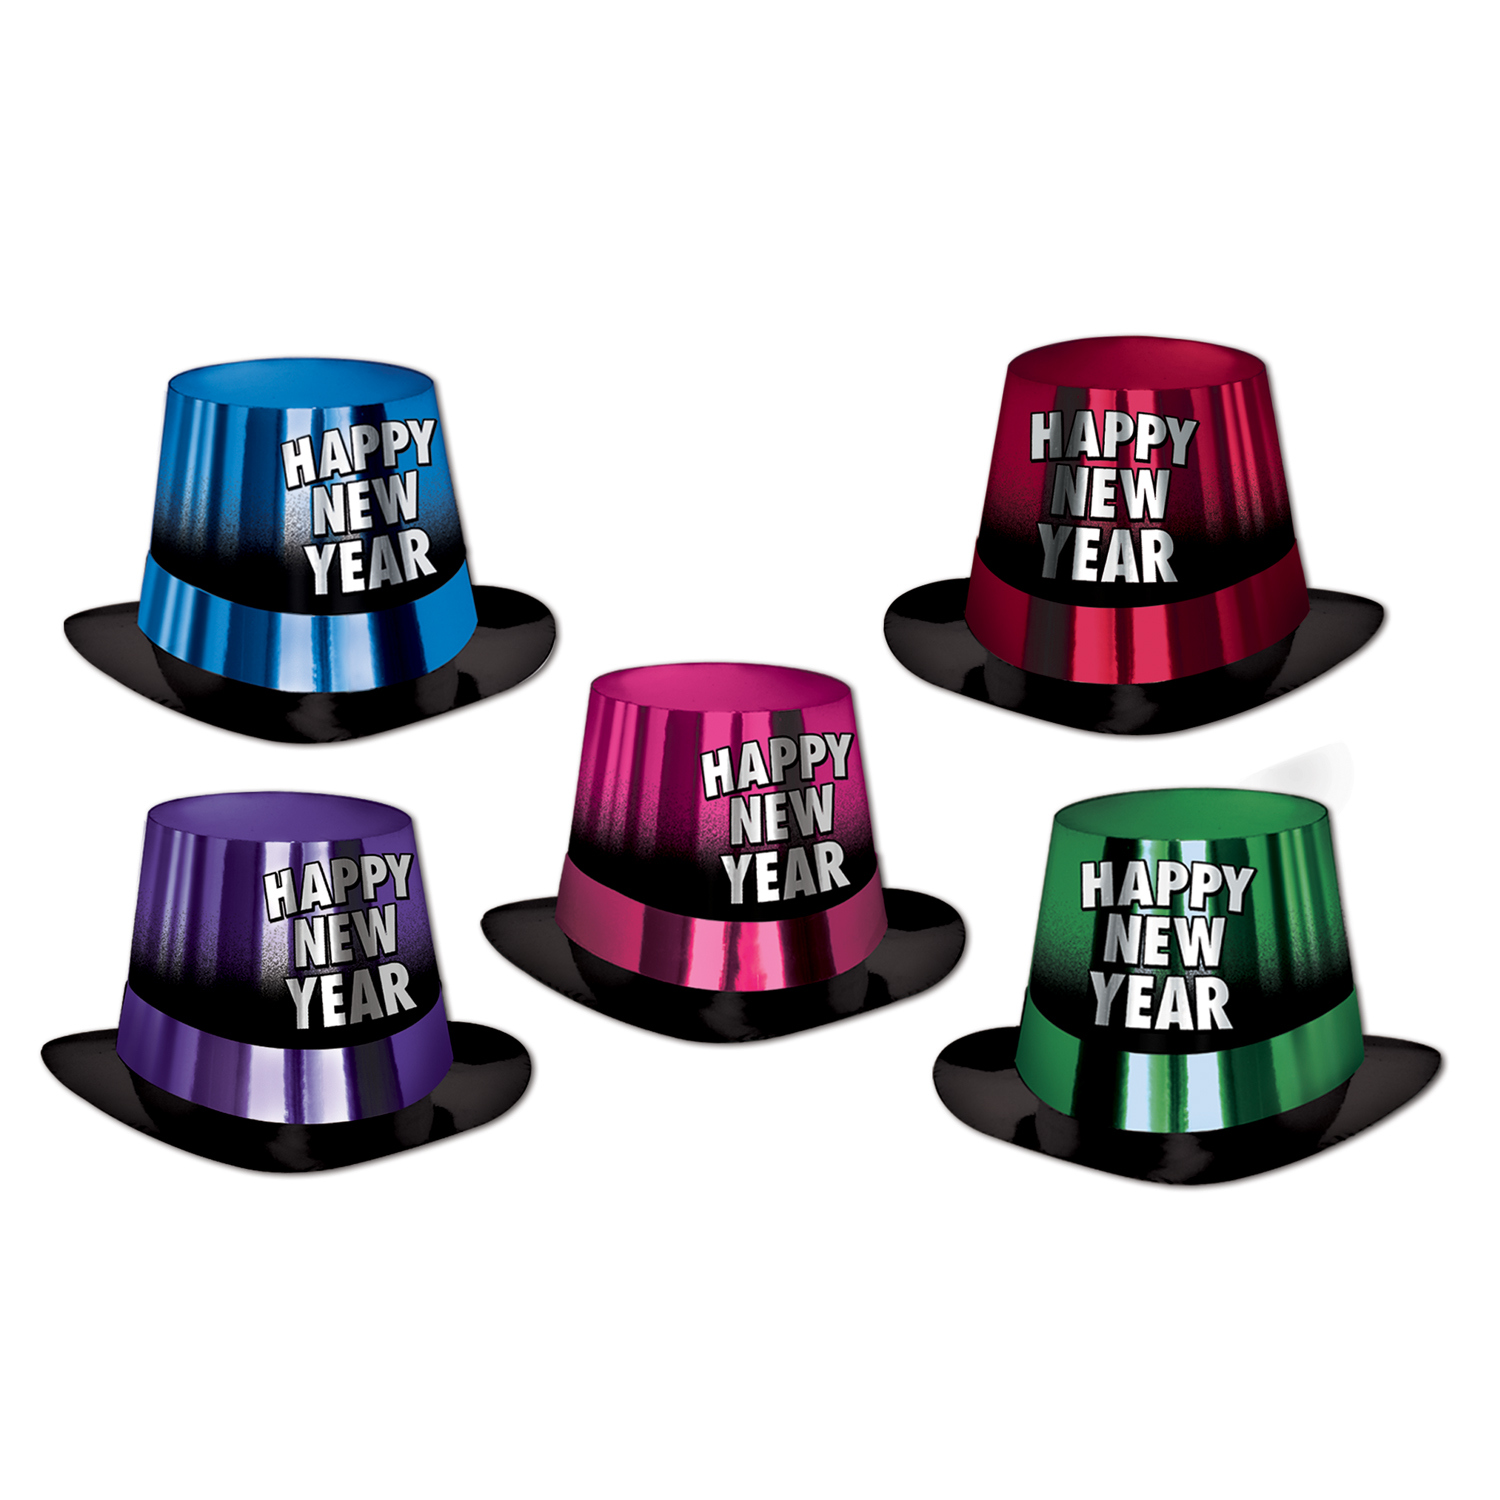 Cardstock entertainer hi-hat with metallic coloring of red, pink, green, purple, and blue and matching band. Each hat has and ombre style with the hat coloring fading into black.   